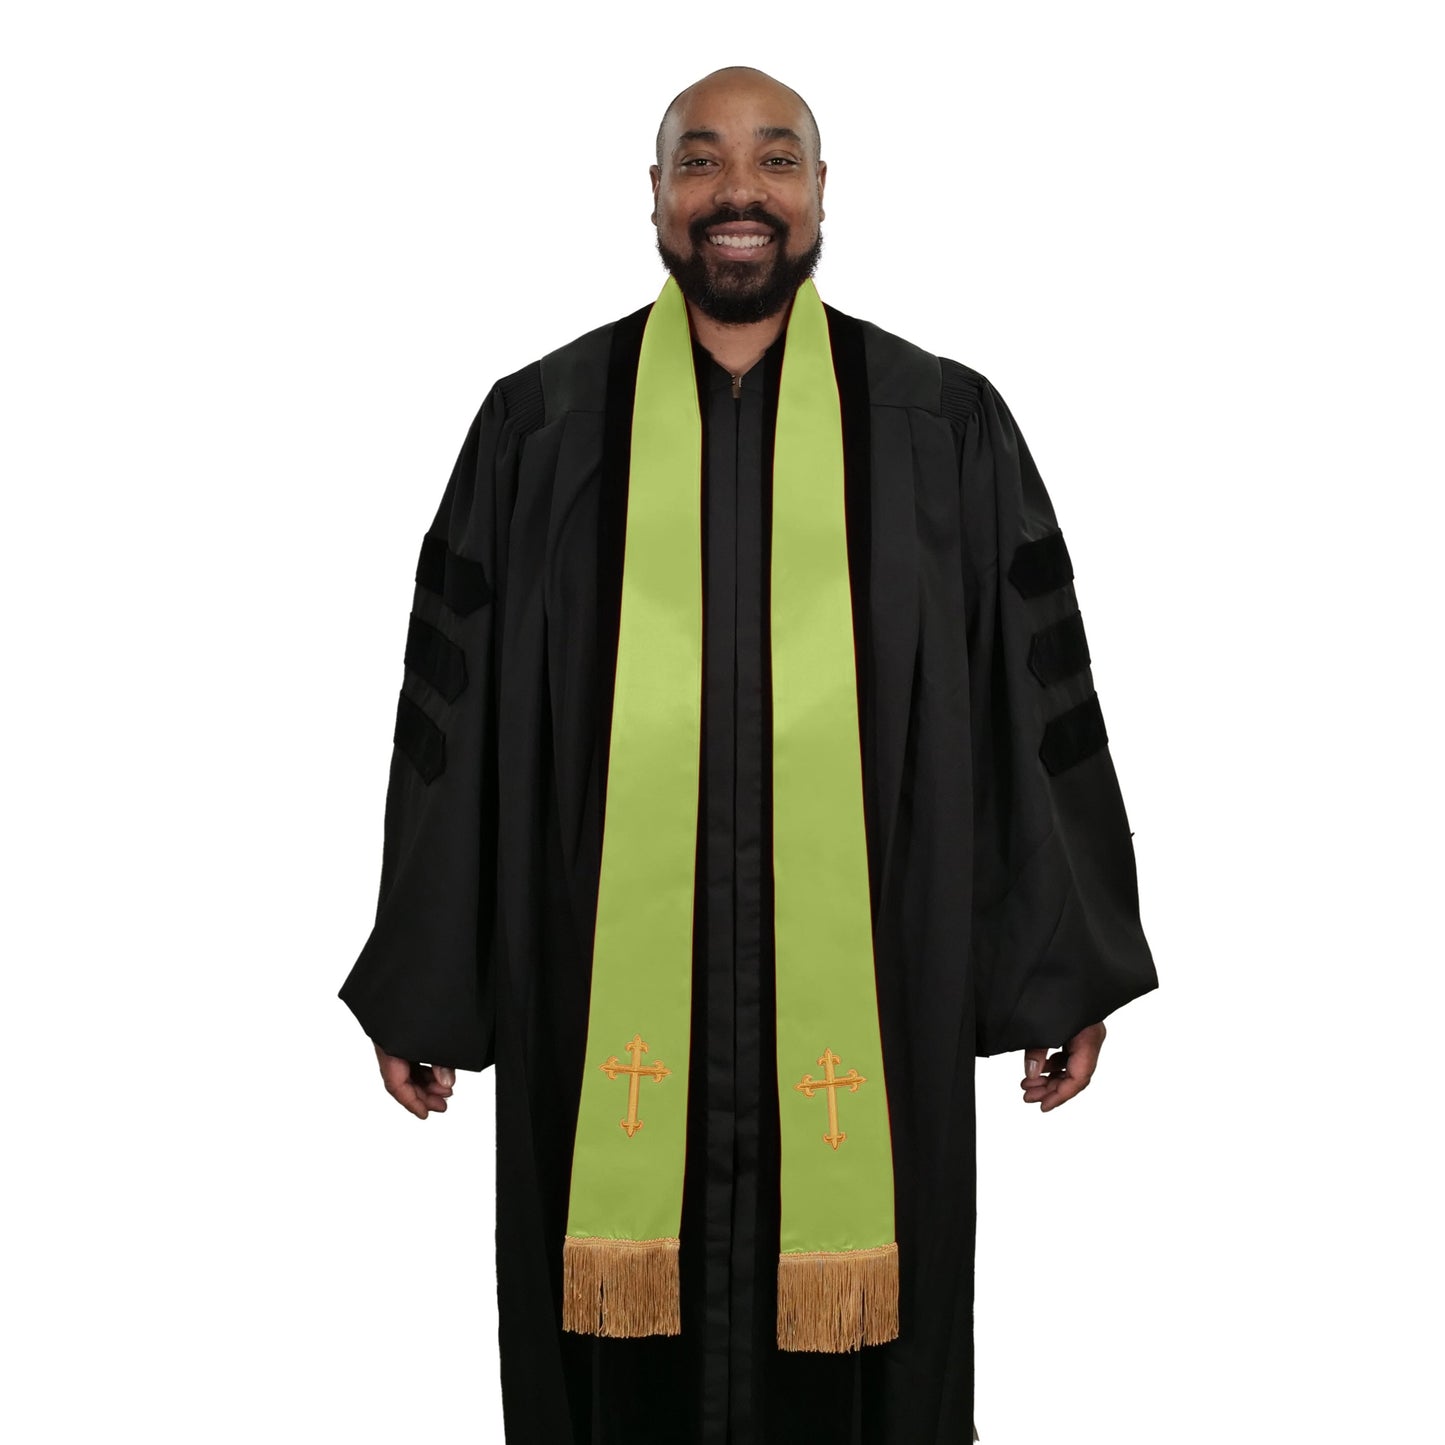 Olive Green Satin Clergy Stole